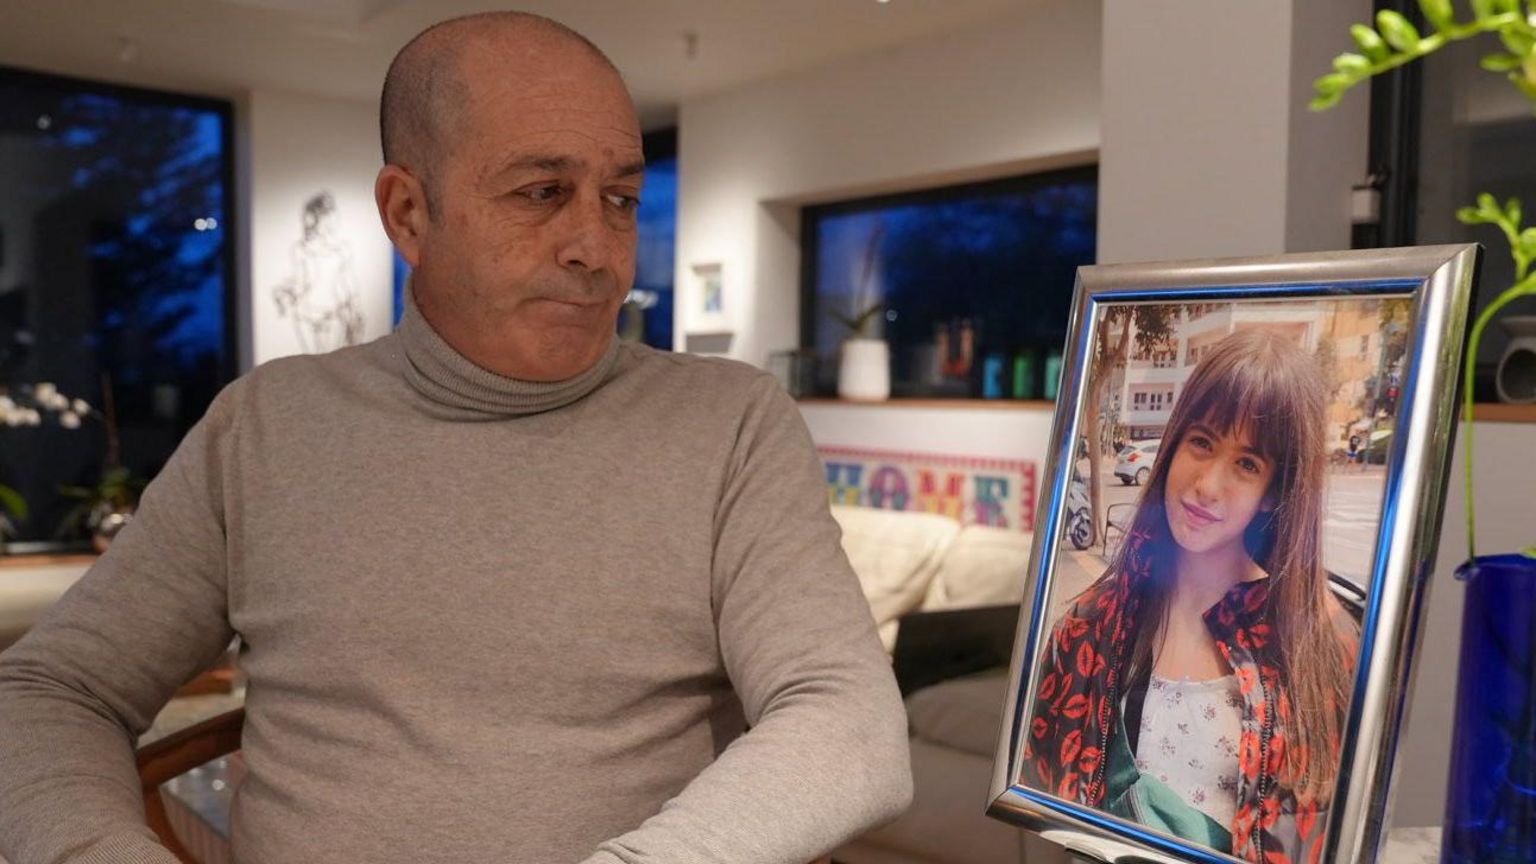 Mario Janin, Mia's dad, looks at an image of his daughter